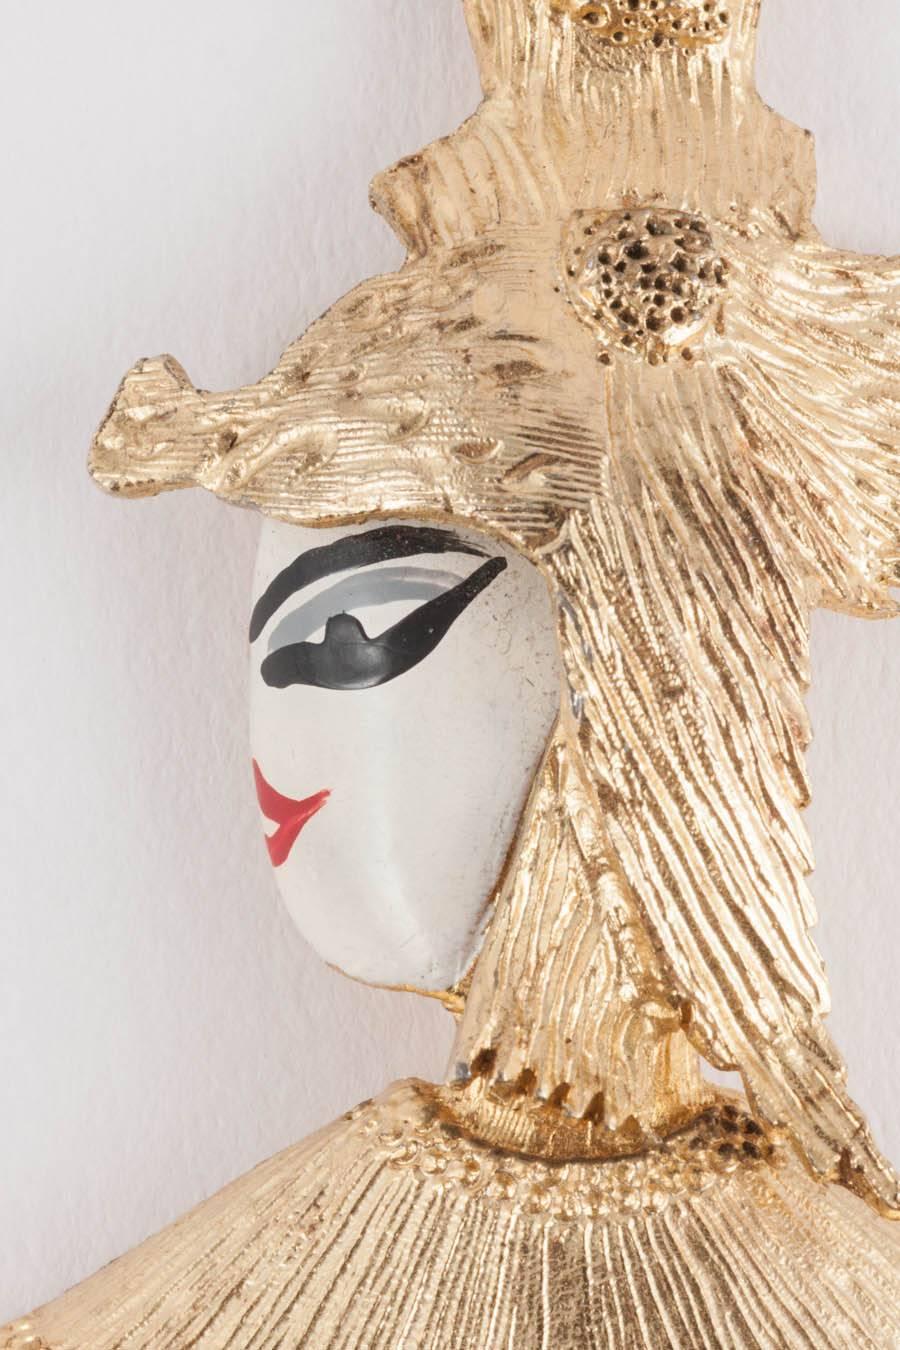 Lee Menichetti whilst designing for Polcini did a wonderful series of characters from opera and ballet in 1972. This delightful Cleopatra brooch is a great example of this collection. Very high quality gilding and a hand painted face, this brooch is